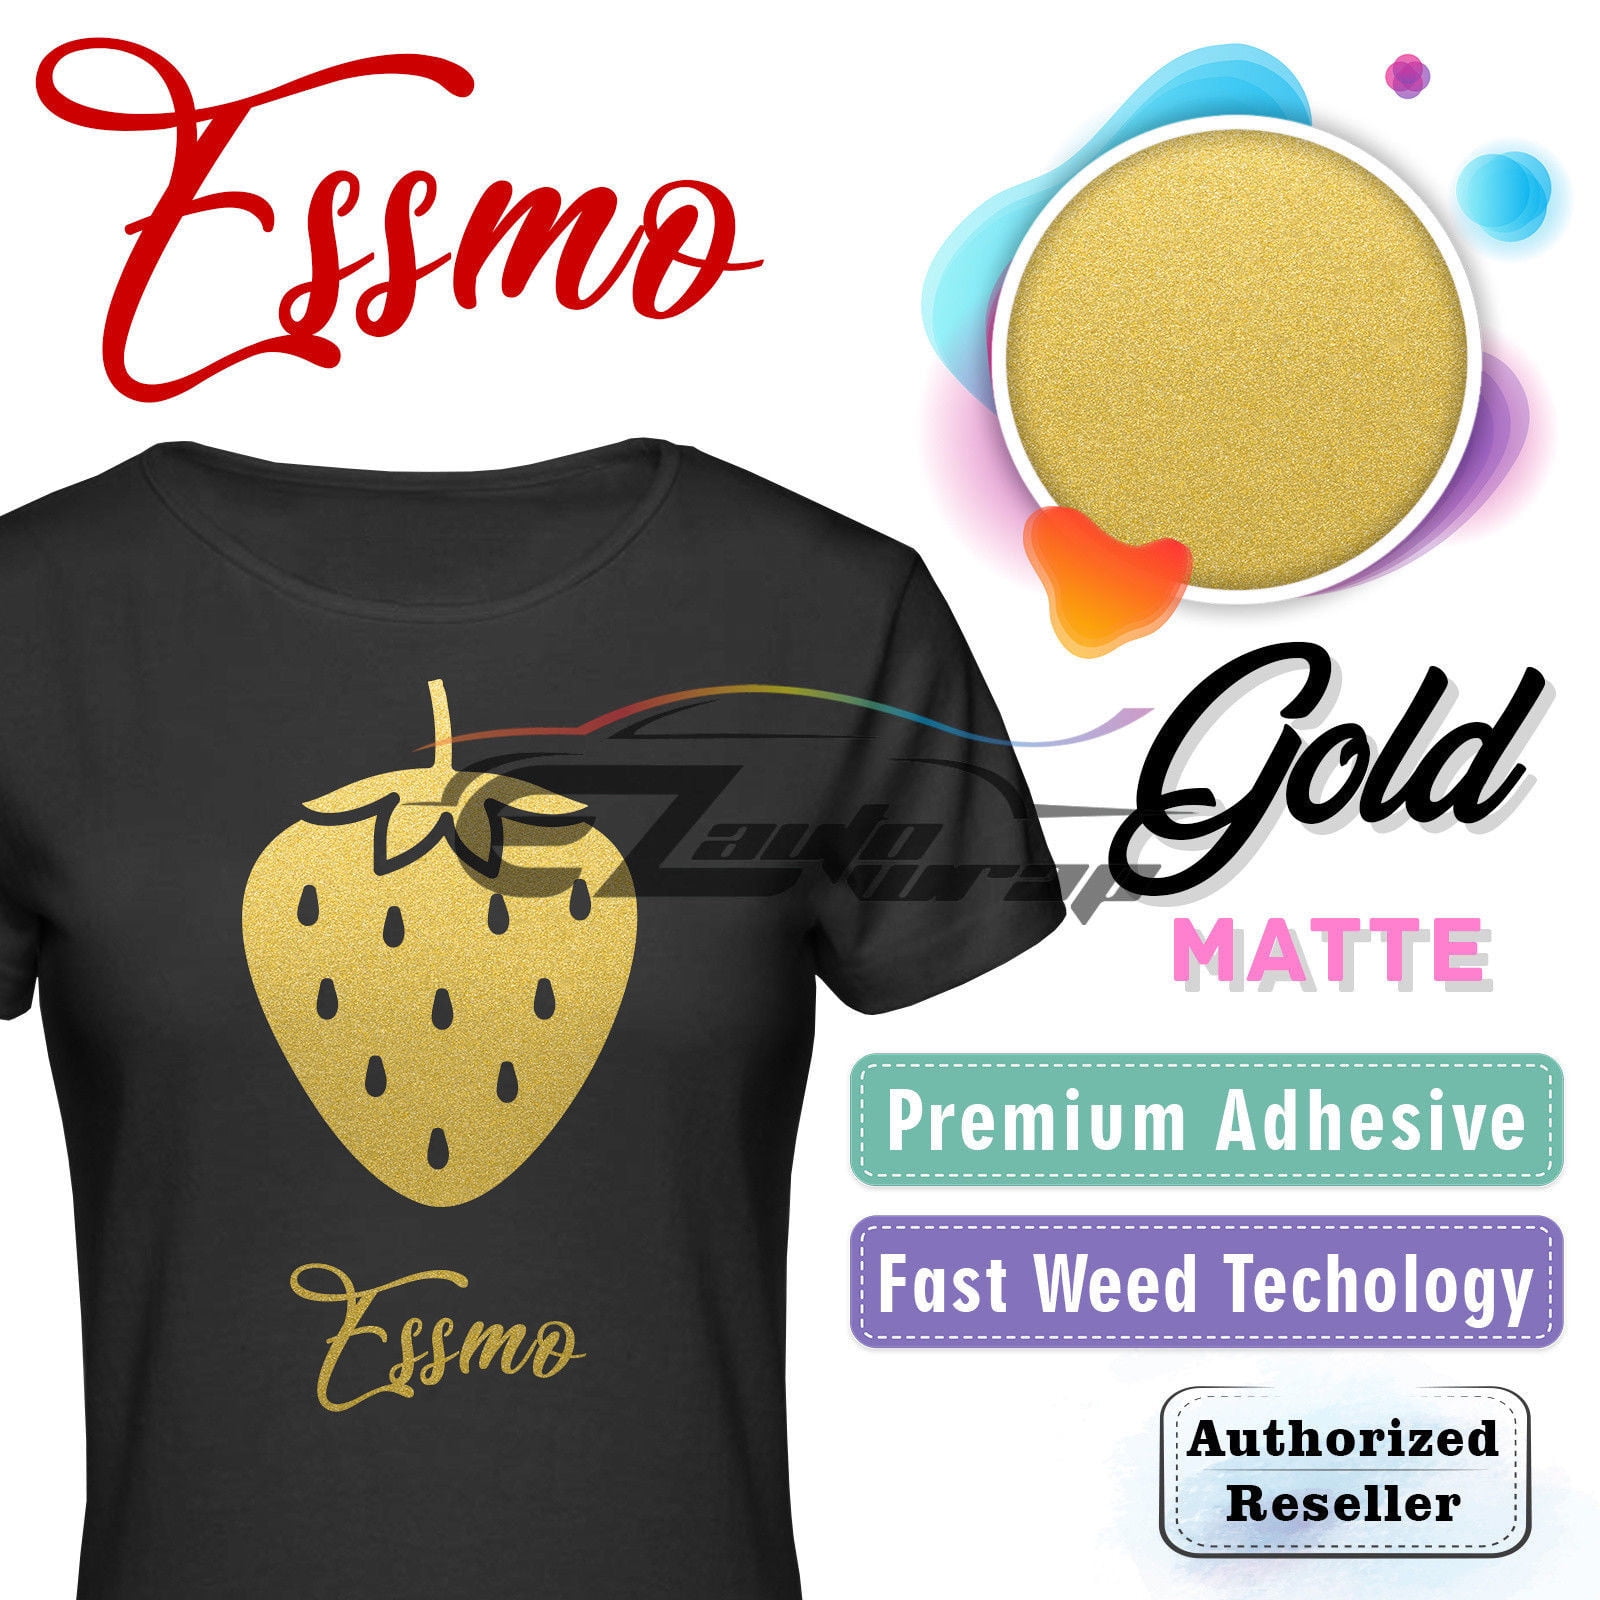 15 Heat Transfer Vinyl Sheets Color Pack Gold Silver Hats Clothing Best Iron On HTV Vinyl for Silhouette Cameo PrimeCuts HTV 12 x 10 for T Shirts Cricut or Heat Press Machine Tool 